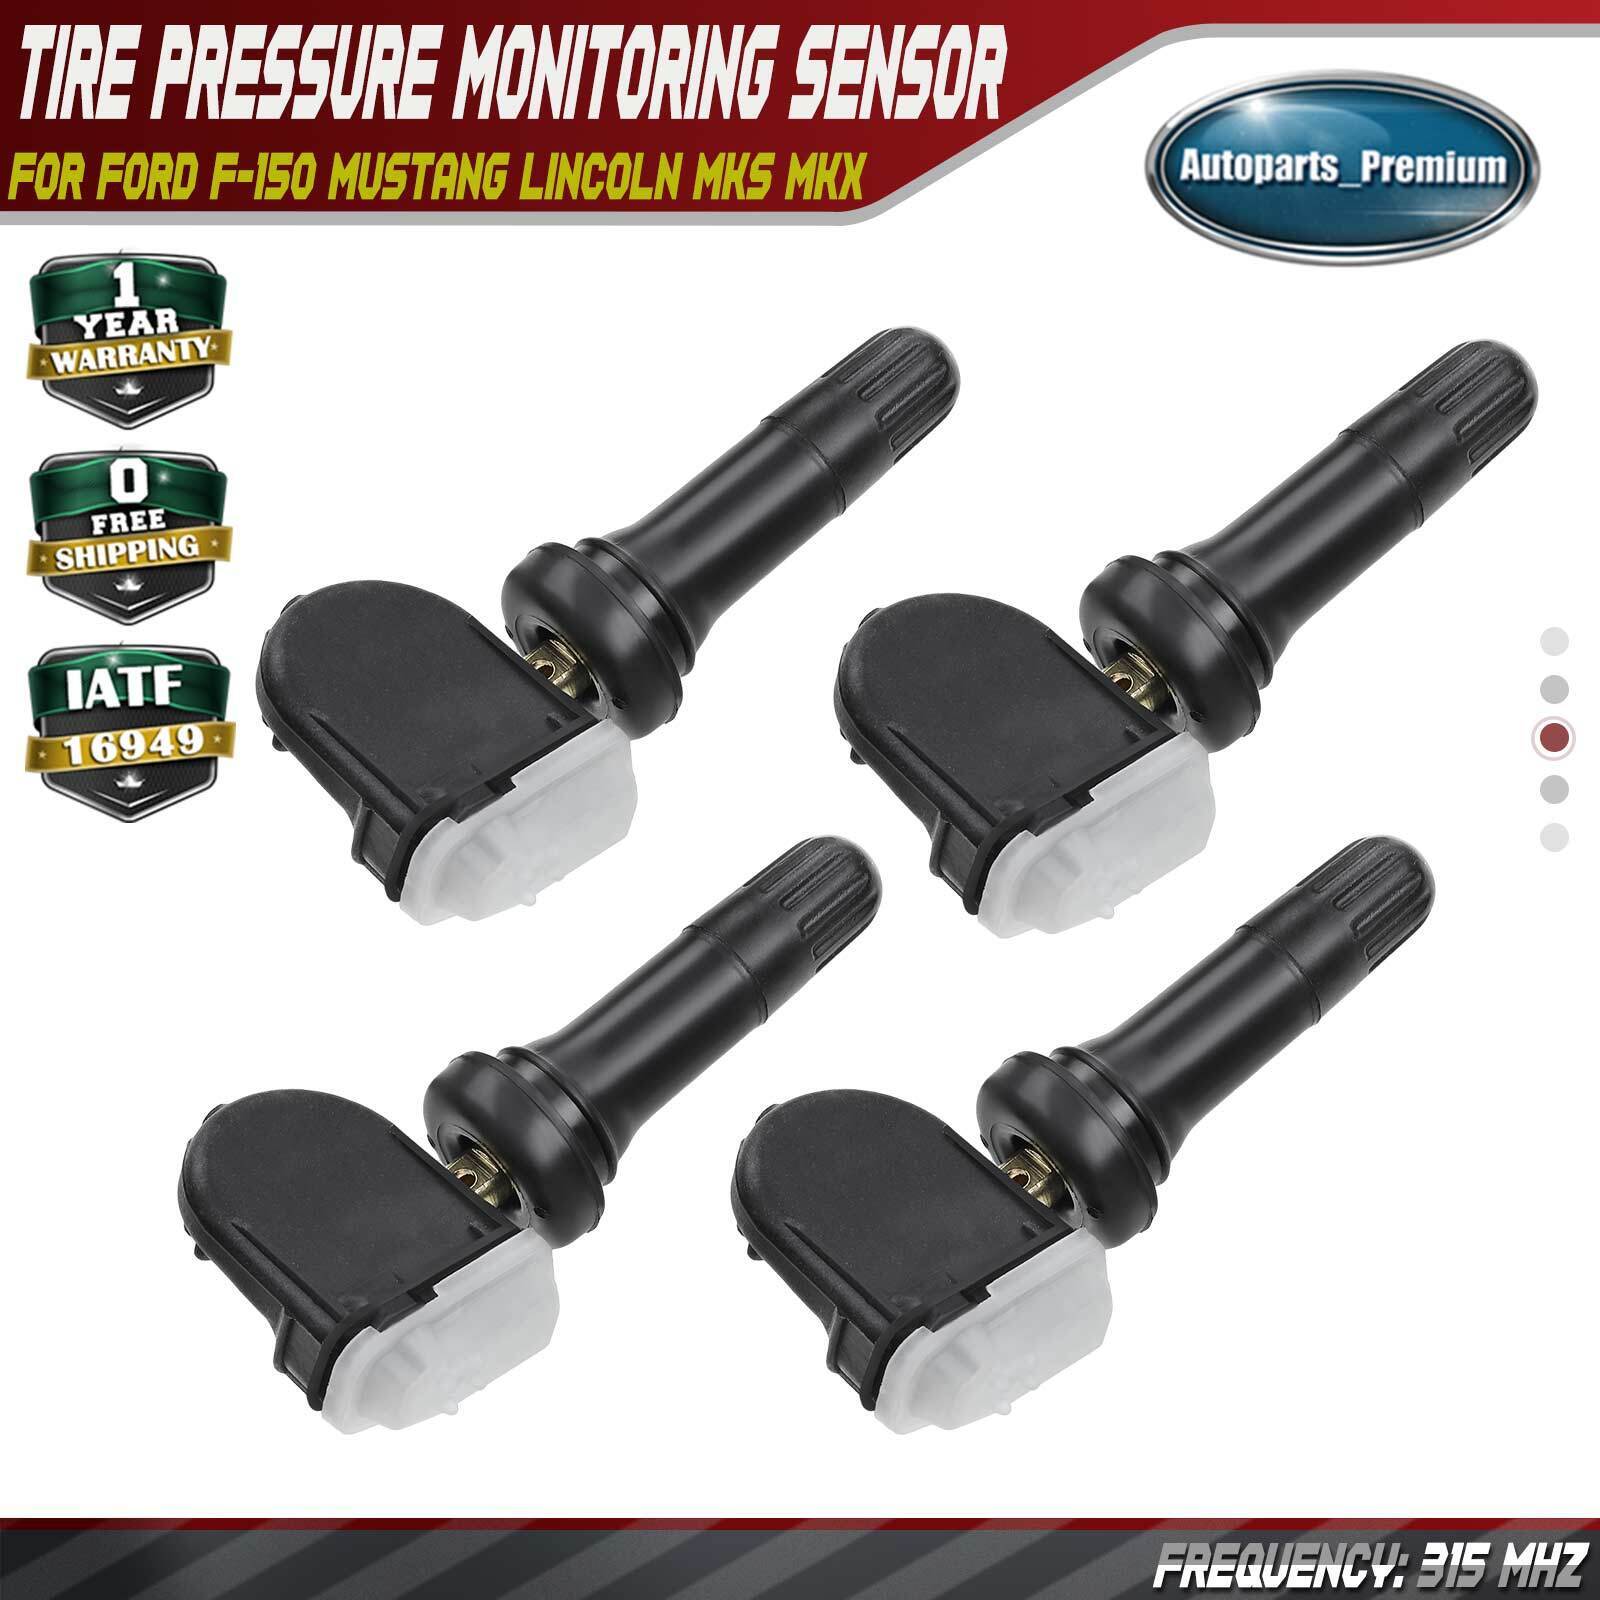 4x Tire Pressure Monitoring System Sensor for Ford F-150 Mustang Lincoln MKS MKX